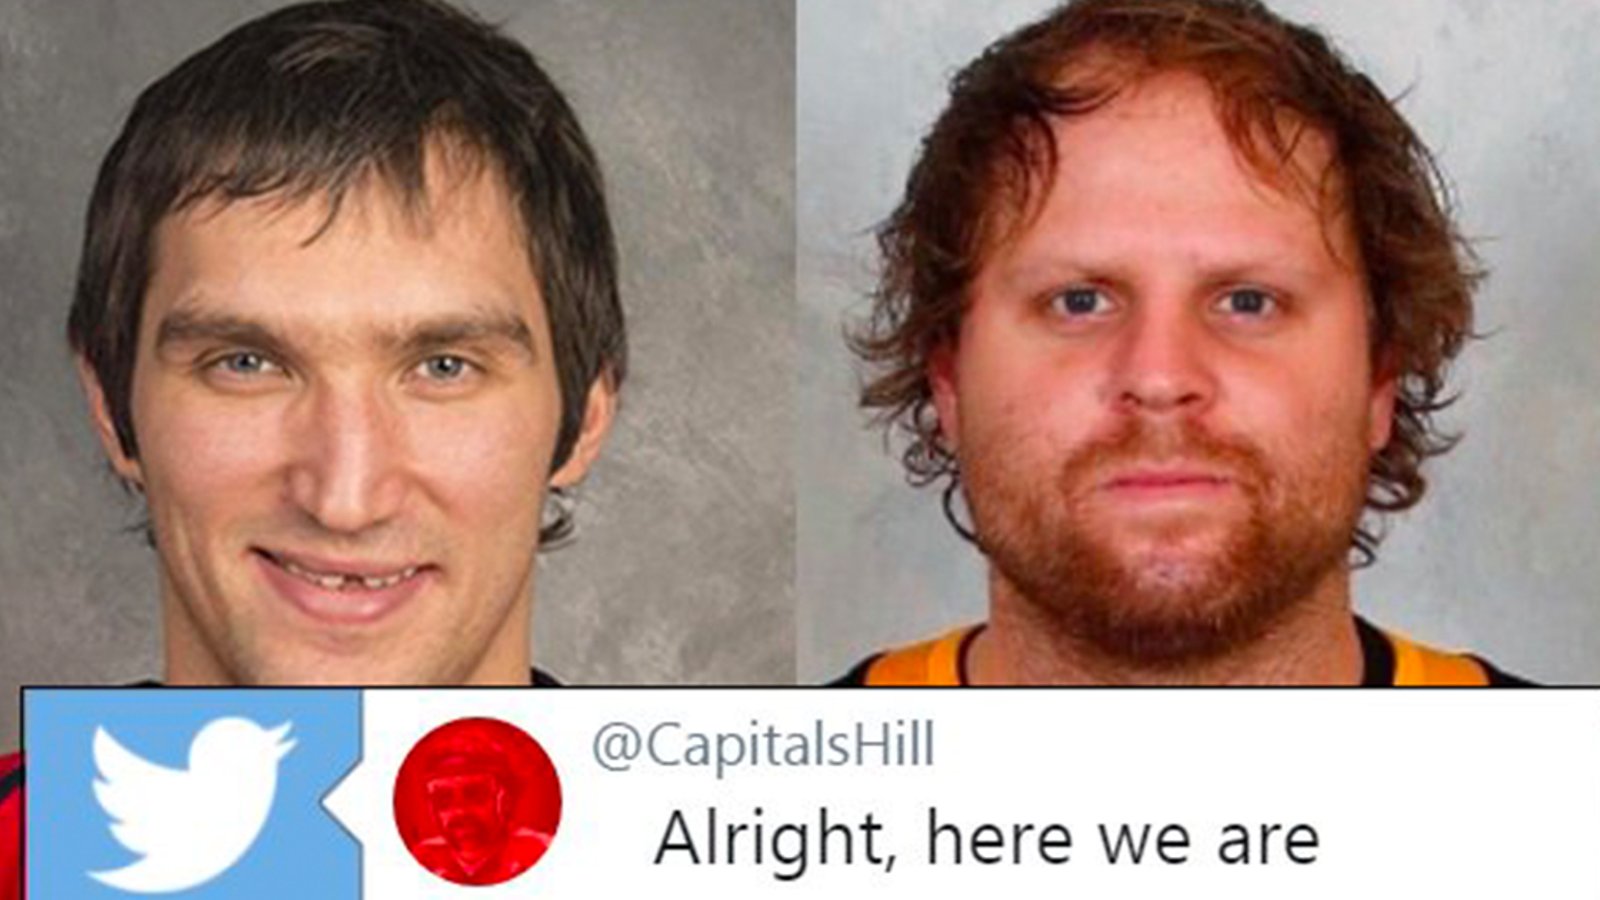 This Ovechkin/Kessel face mashup will haunt your dreams.